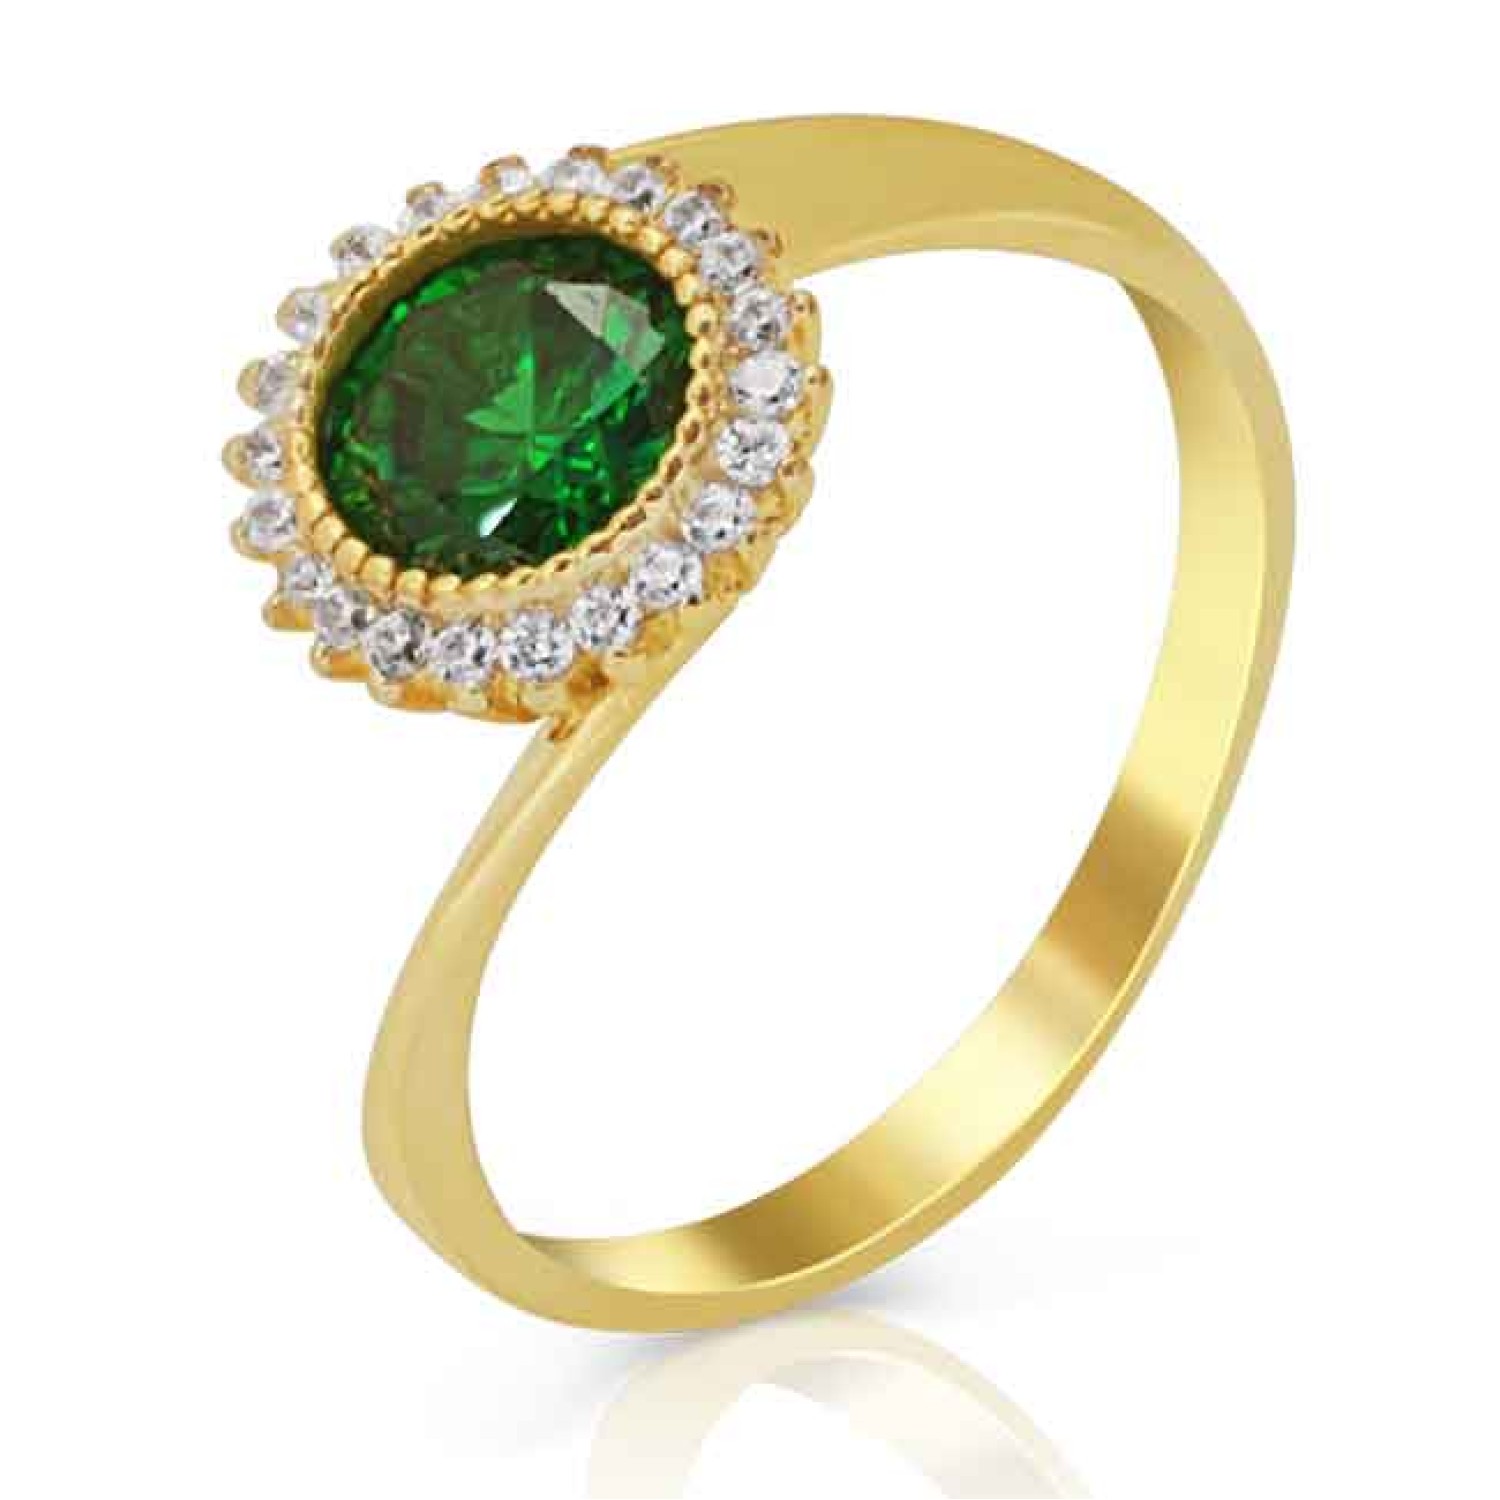 9ct Yellow Gold and Cubic Zirconia Ring MS41332E. 9ct Yellow Gold and Cubic Zirconia Solitaire 9ct Gold Set with Emerald coloured Cubic Zirconia Christies exclusive 5 year guarantee 3 Months No Payments and Interest for Q Card holders Gift wrapped on requ